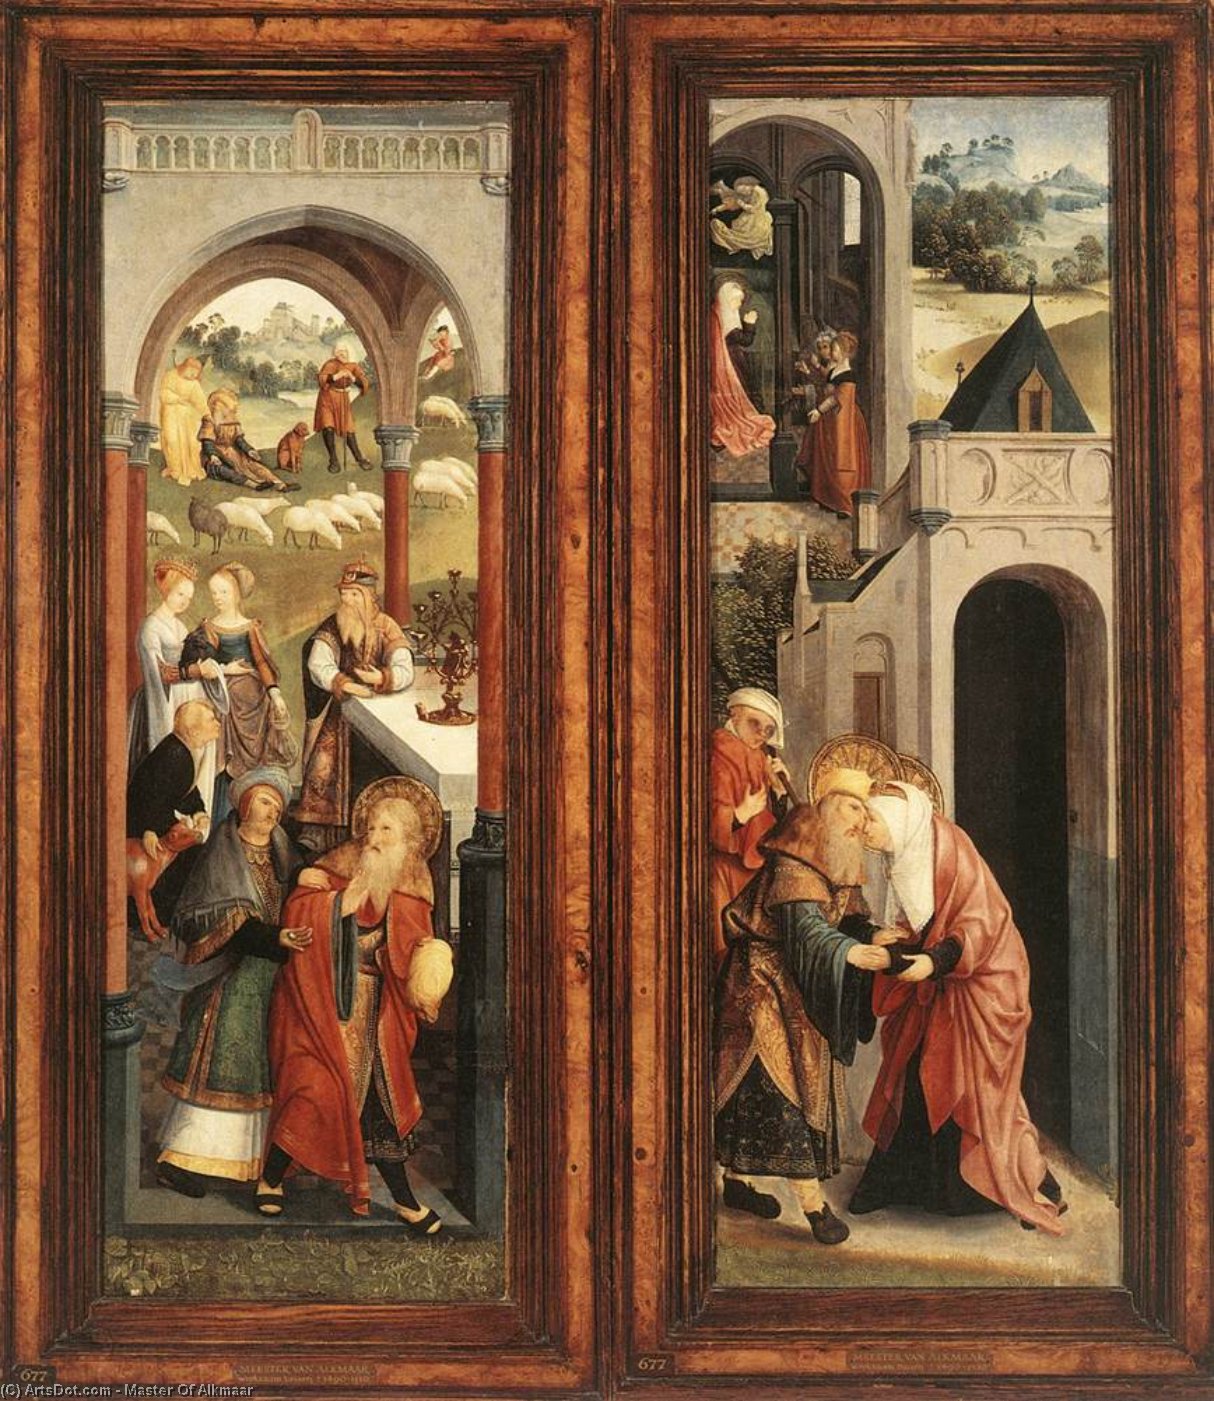 WikiOO.org - Encyclopedia of Fine Arts - Lukisan, Artwork Master Of Alkmaar - Scenes from the Life of Joachim and Anna